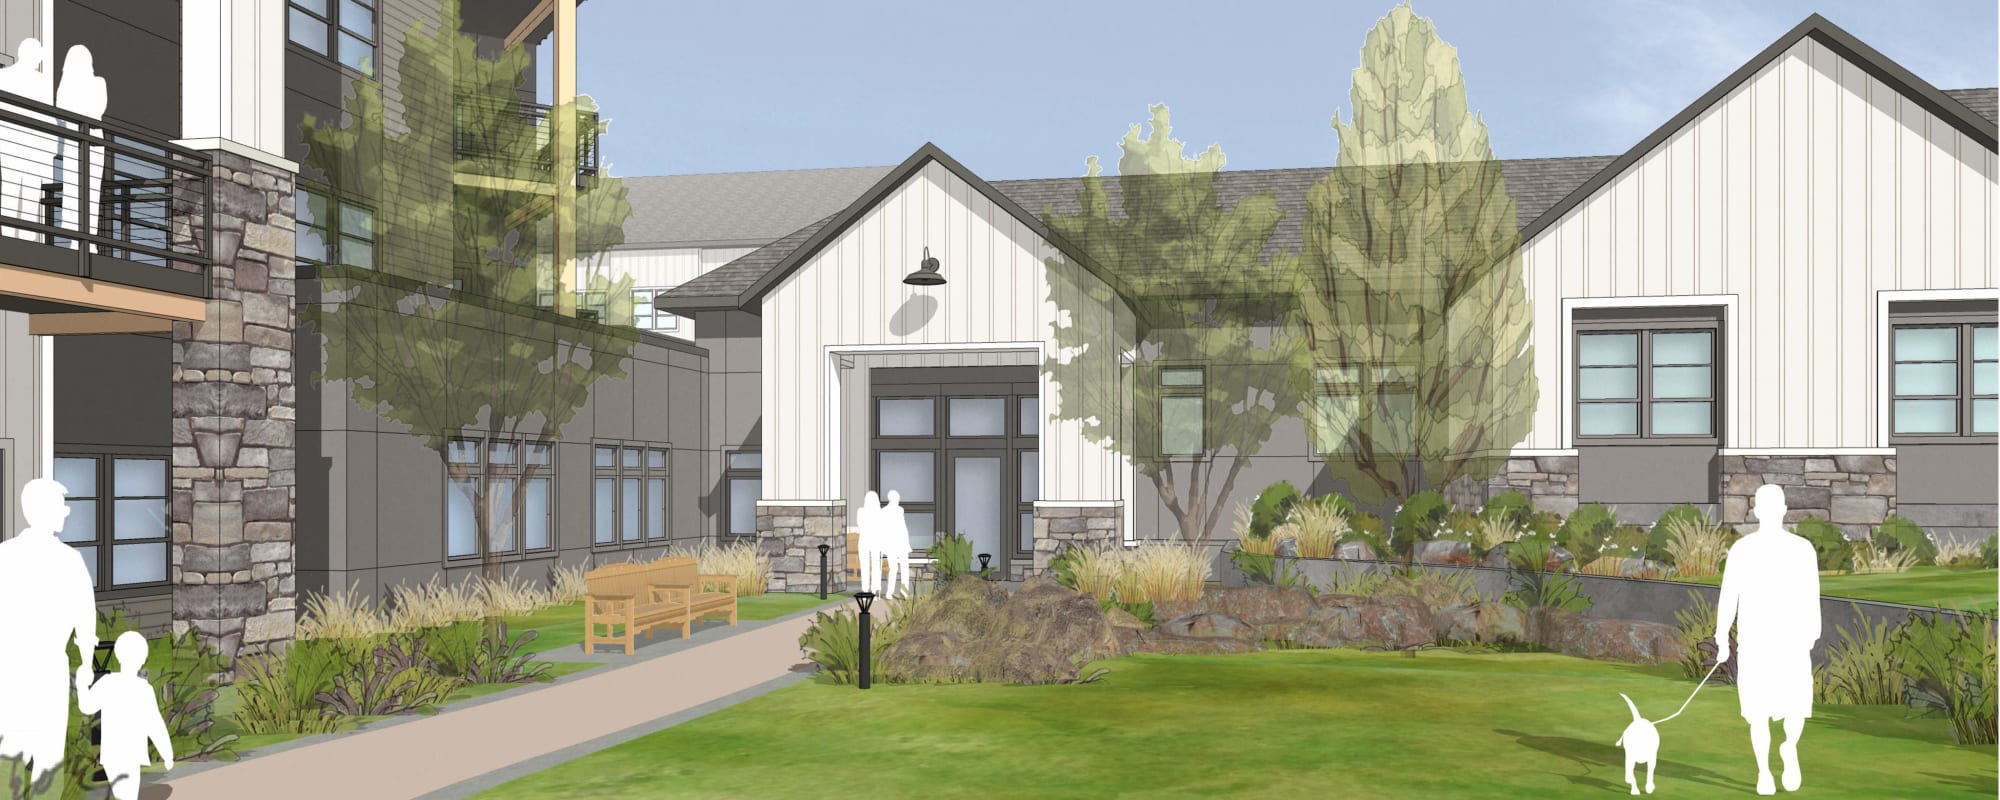 Rendering of The Springs at Happy Valley facility at Happy Valley, Oregon